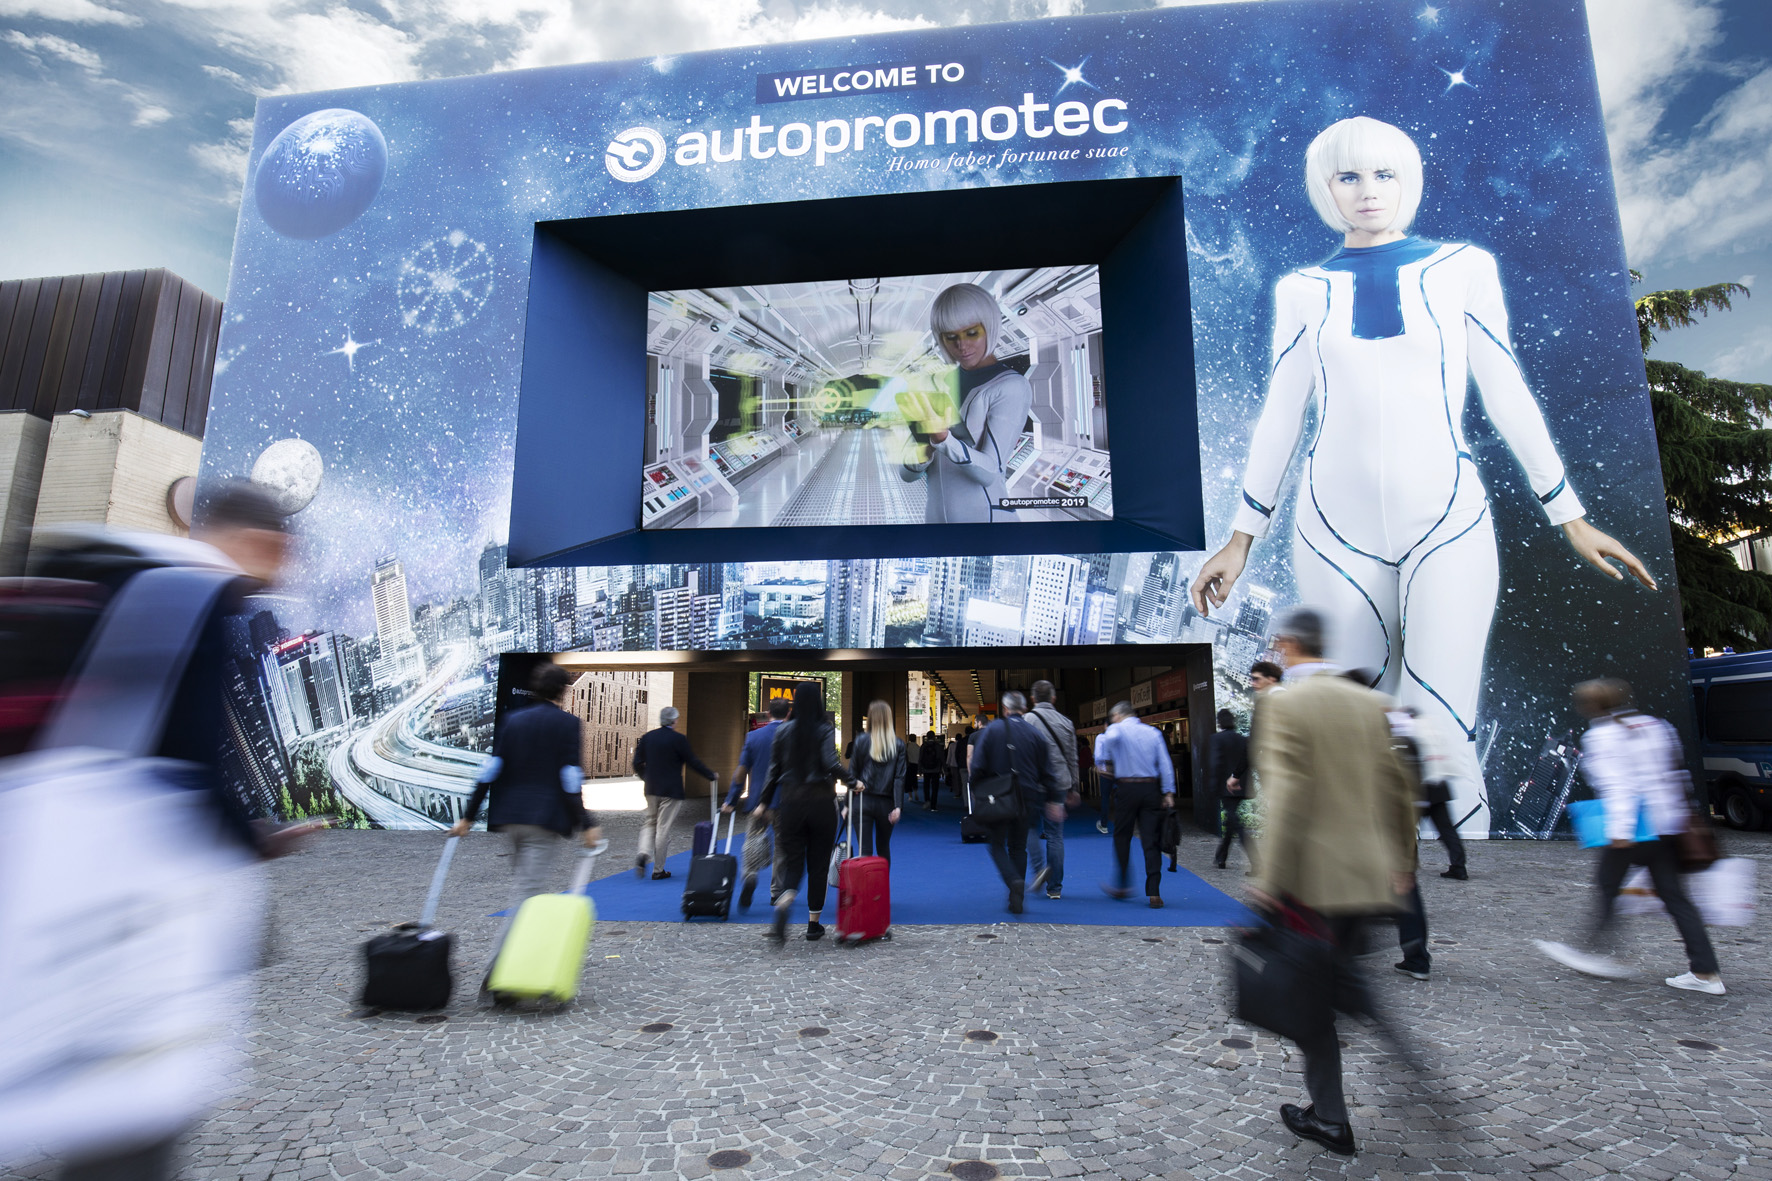 Autopromotec: Changing Europe makes cooperation more important